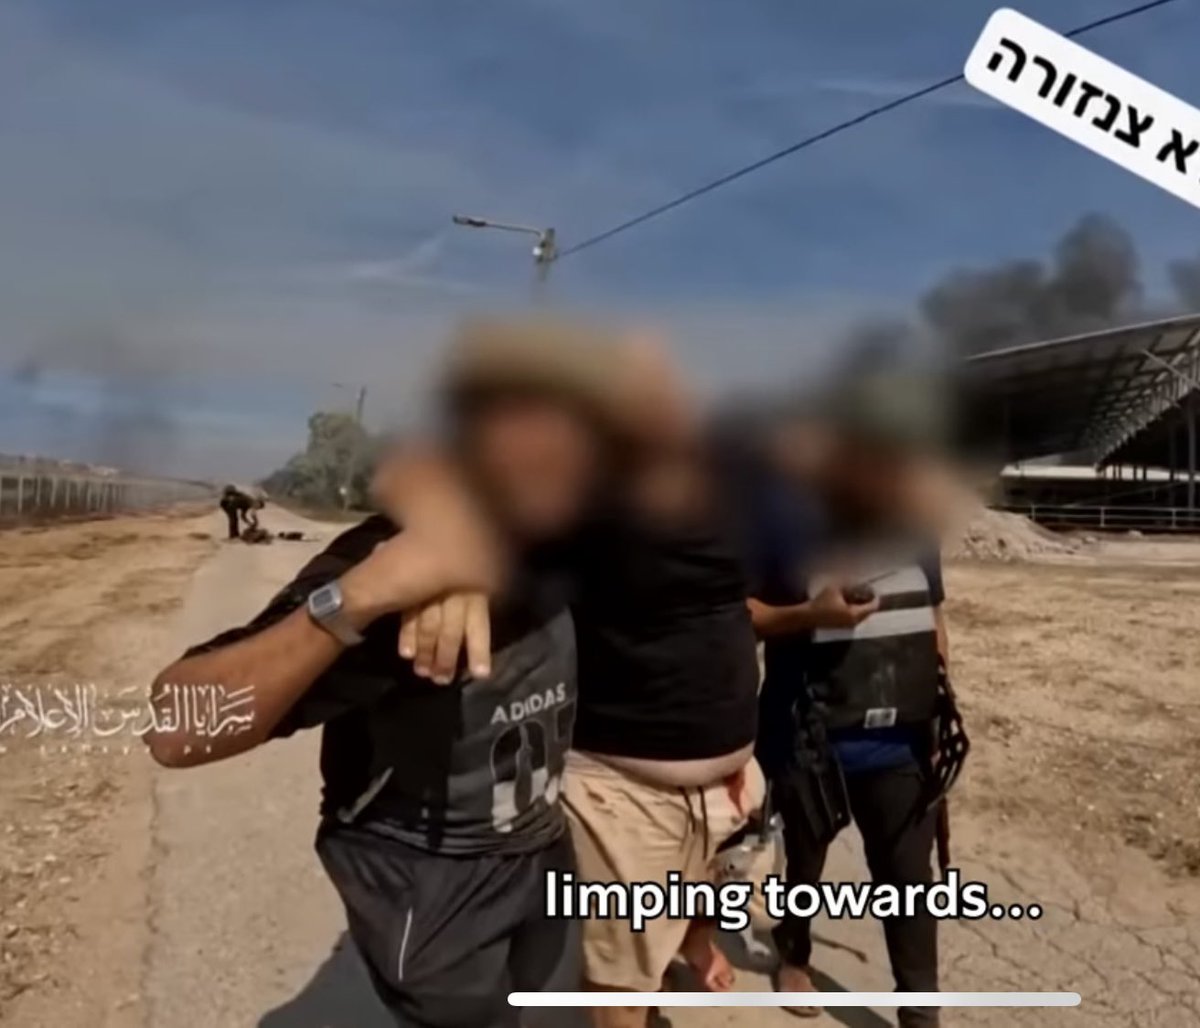 After Hamas executed Tomer and Dikla they stole away the injured father Noam and his daughters from another marriage Dafna and Ela. They published this footage of him being taken to Gaza though his body was found later. The girls were kept and only released recently. /3